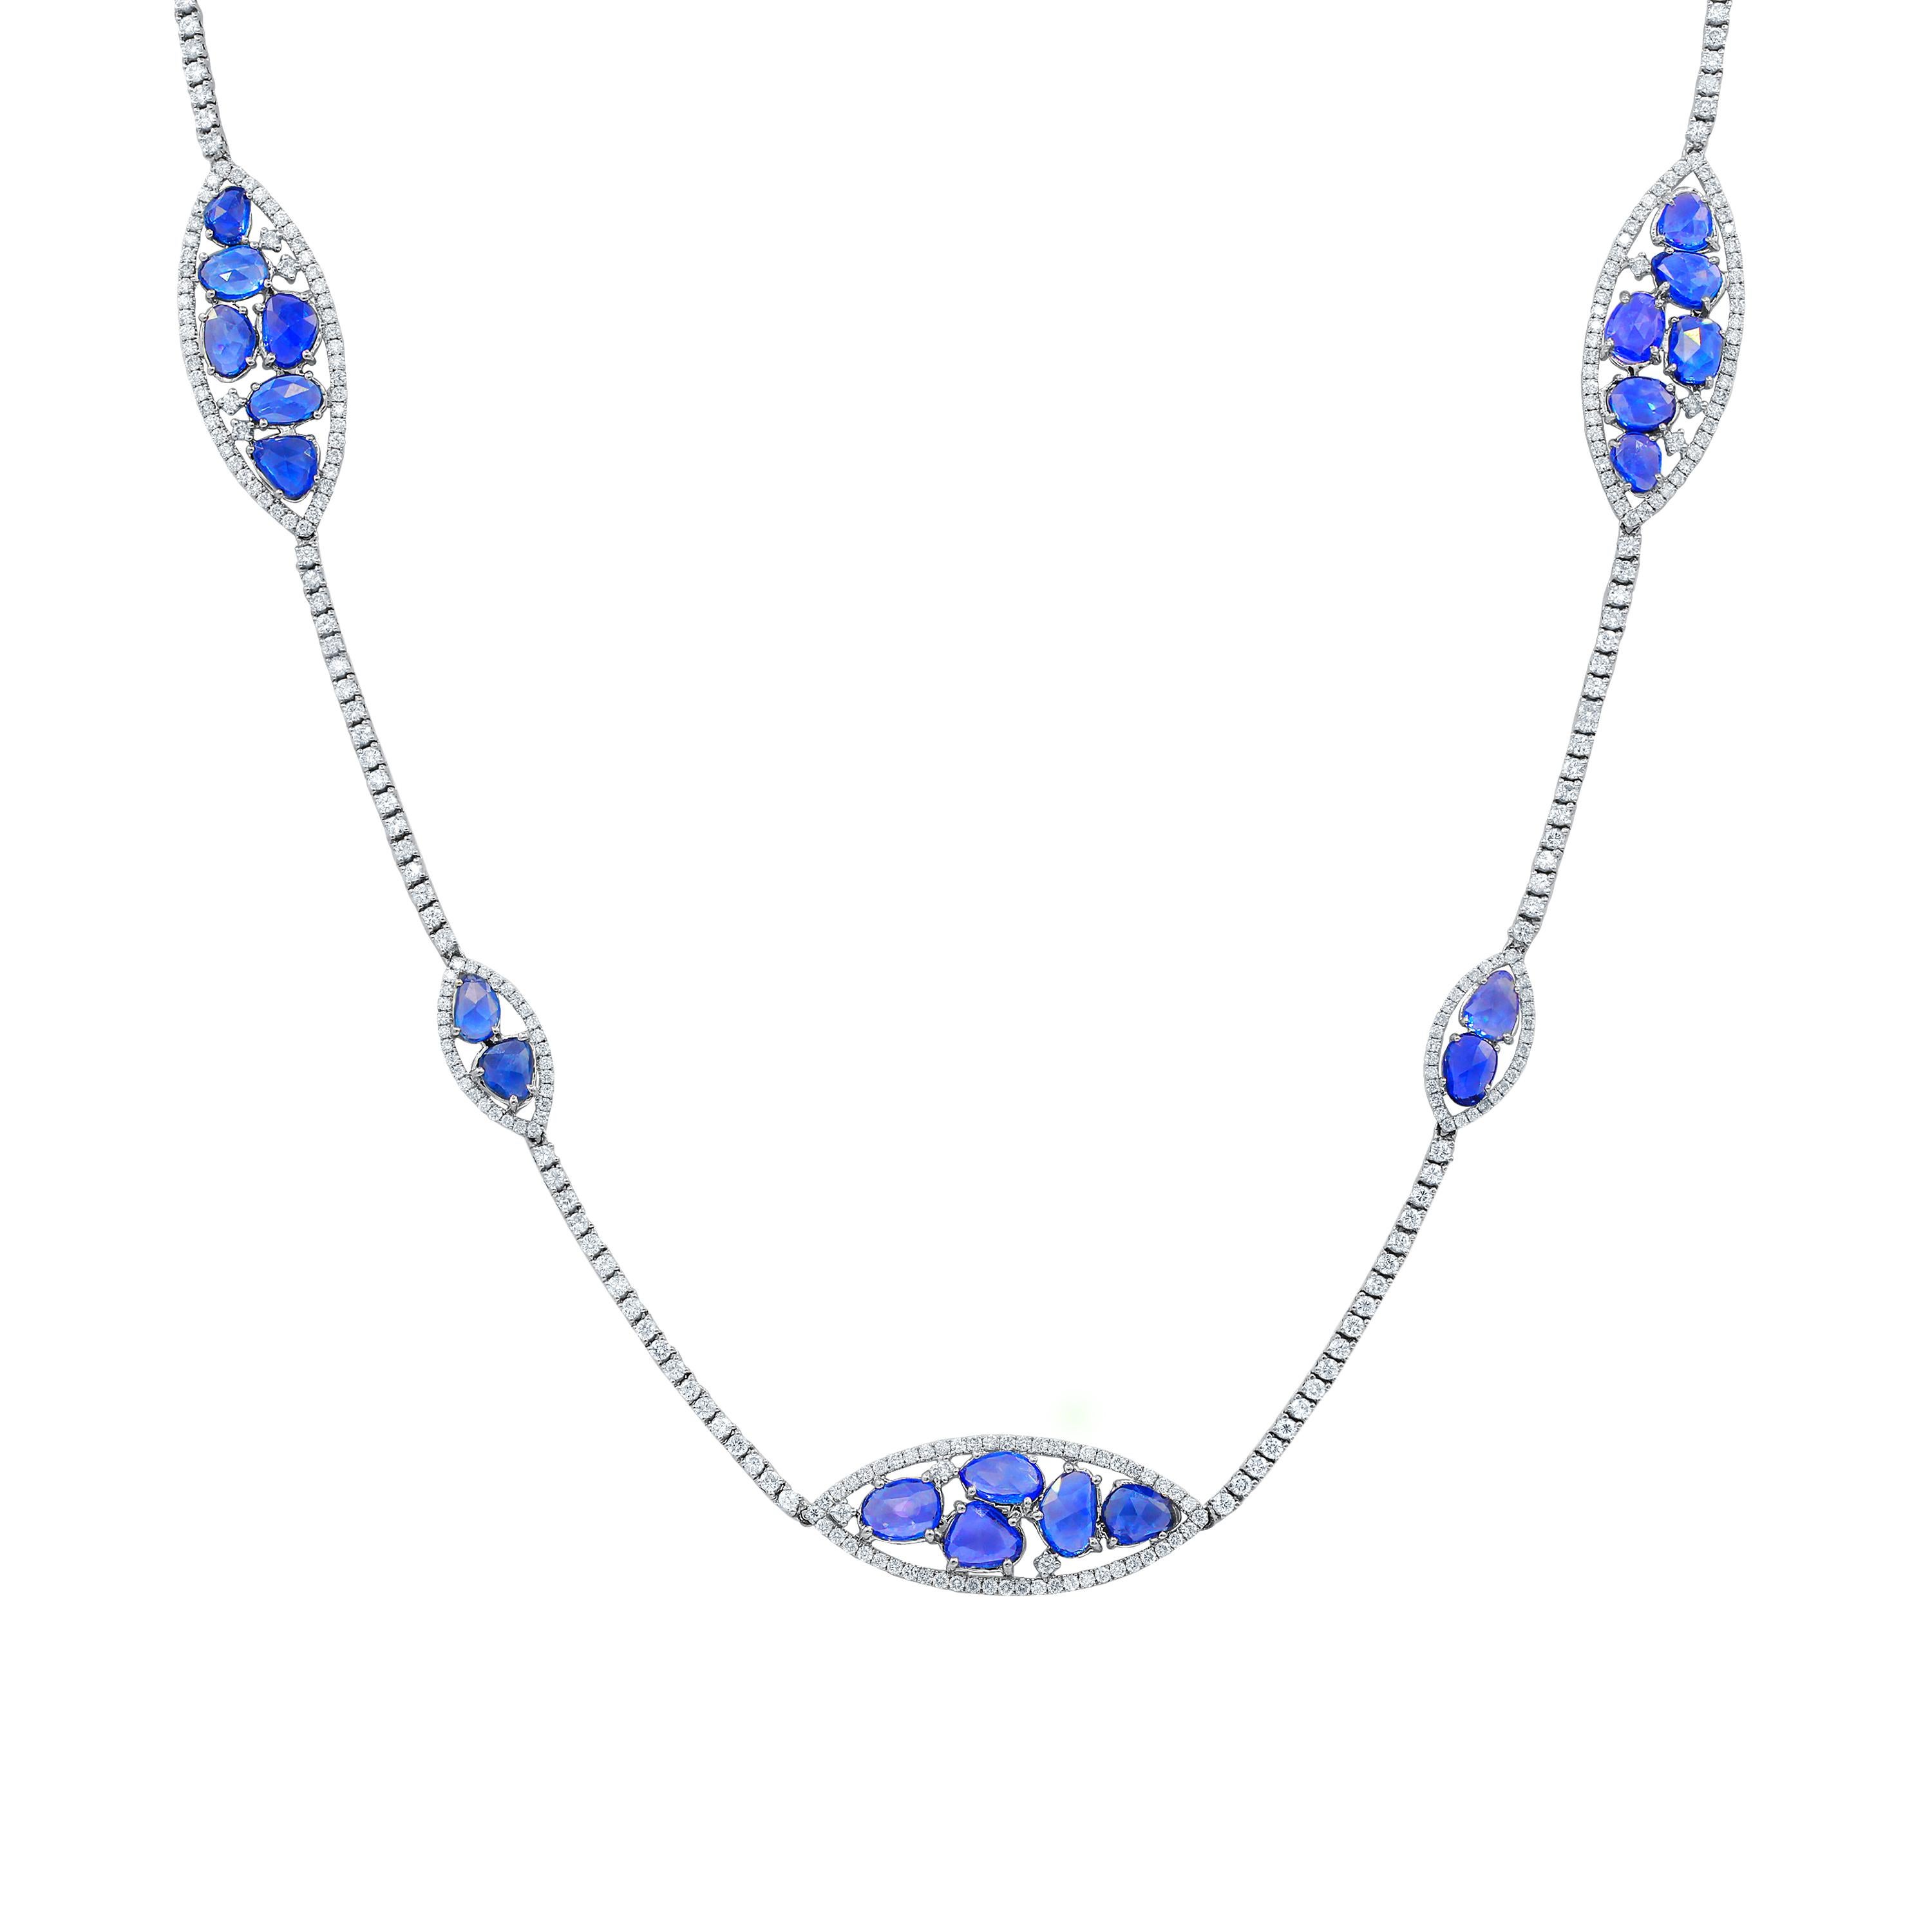 18k White Gold, Diamond & Blue Sapphire Necklace, Marquise design with multi-shaped pink sapphire clusters in pronged setting
Pave diamond border and chain.
Tab insert with safety clasp
Necklace length: 30